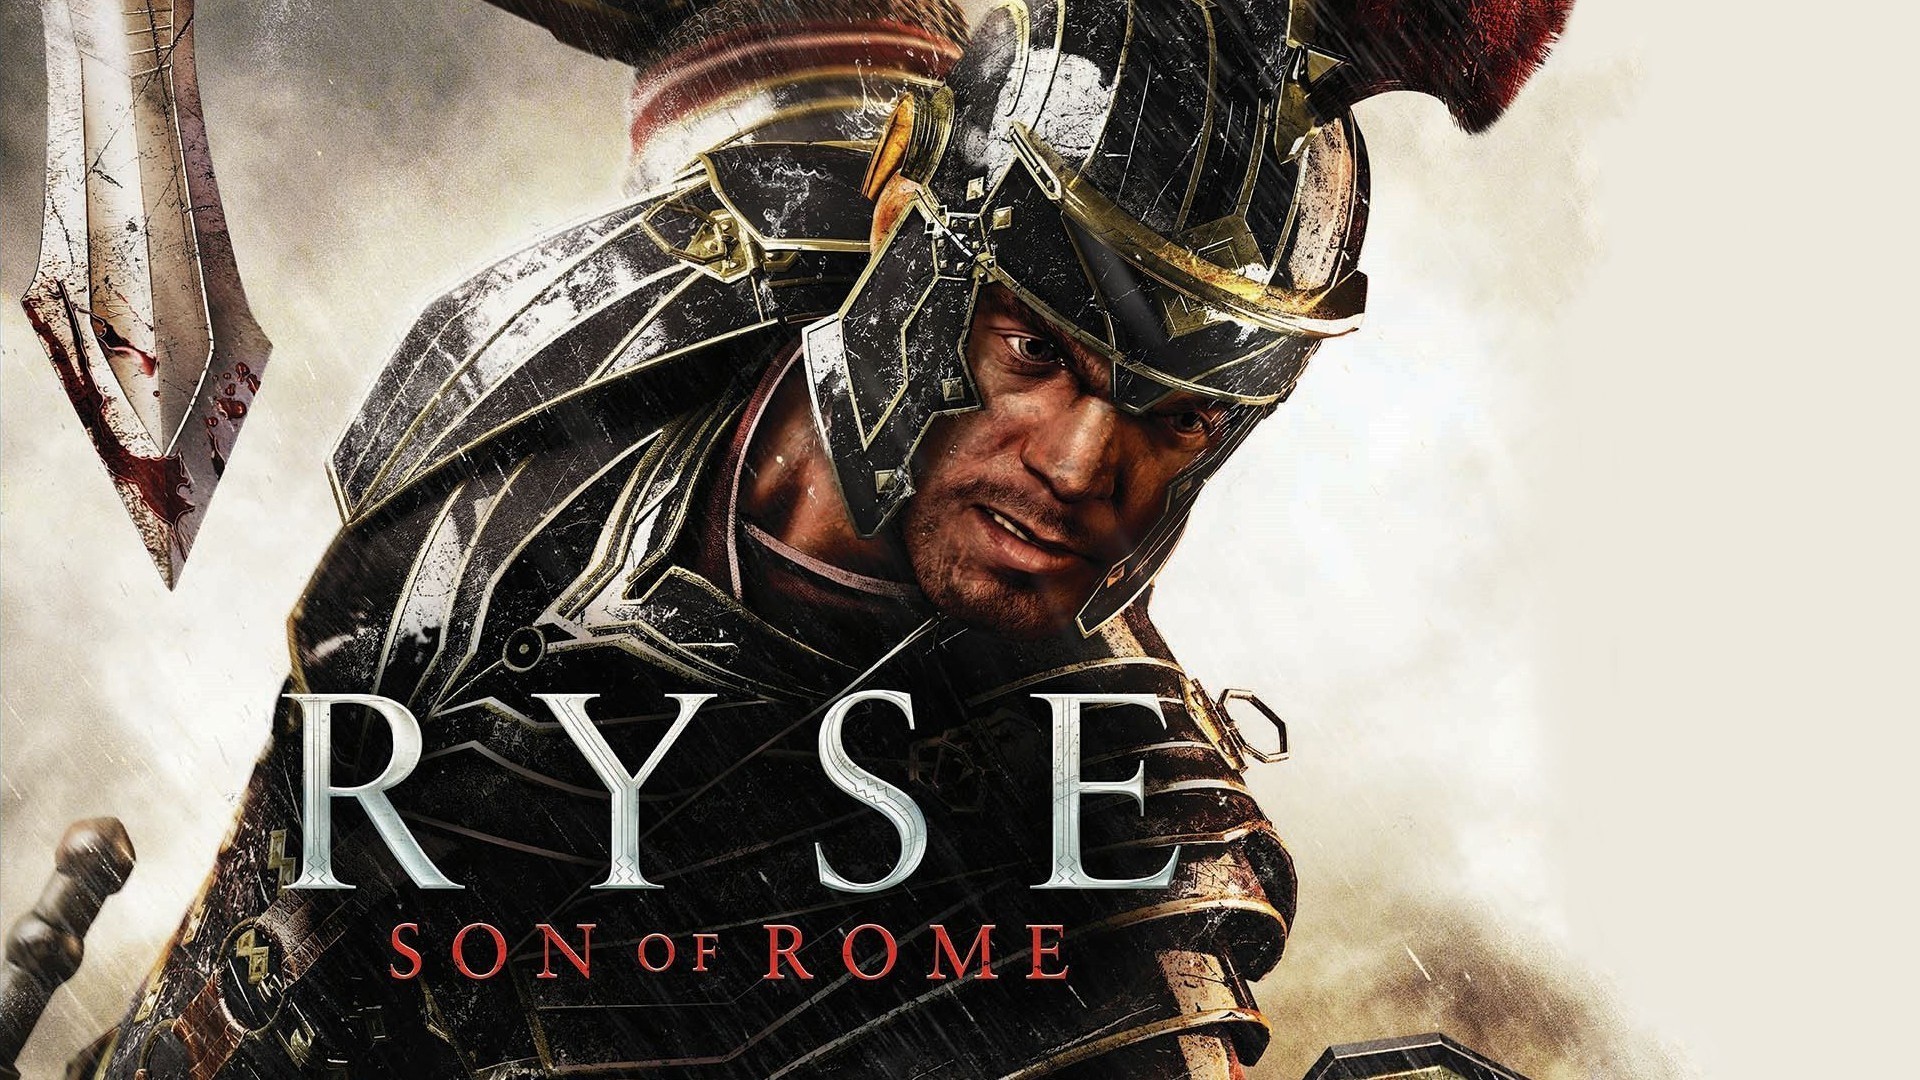 1920x1080 #1923928, ryse son of rome category - HDQ Images ryse son of rome wallpaper